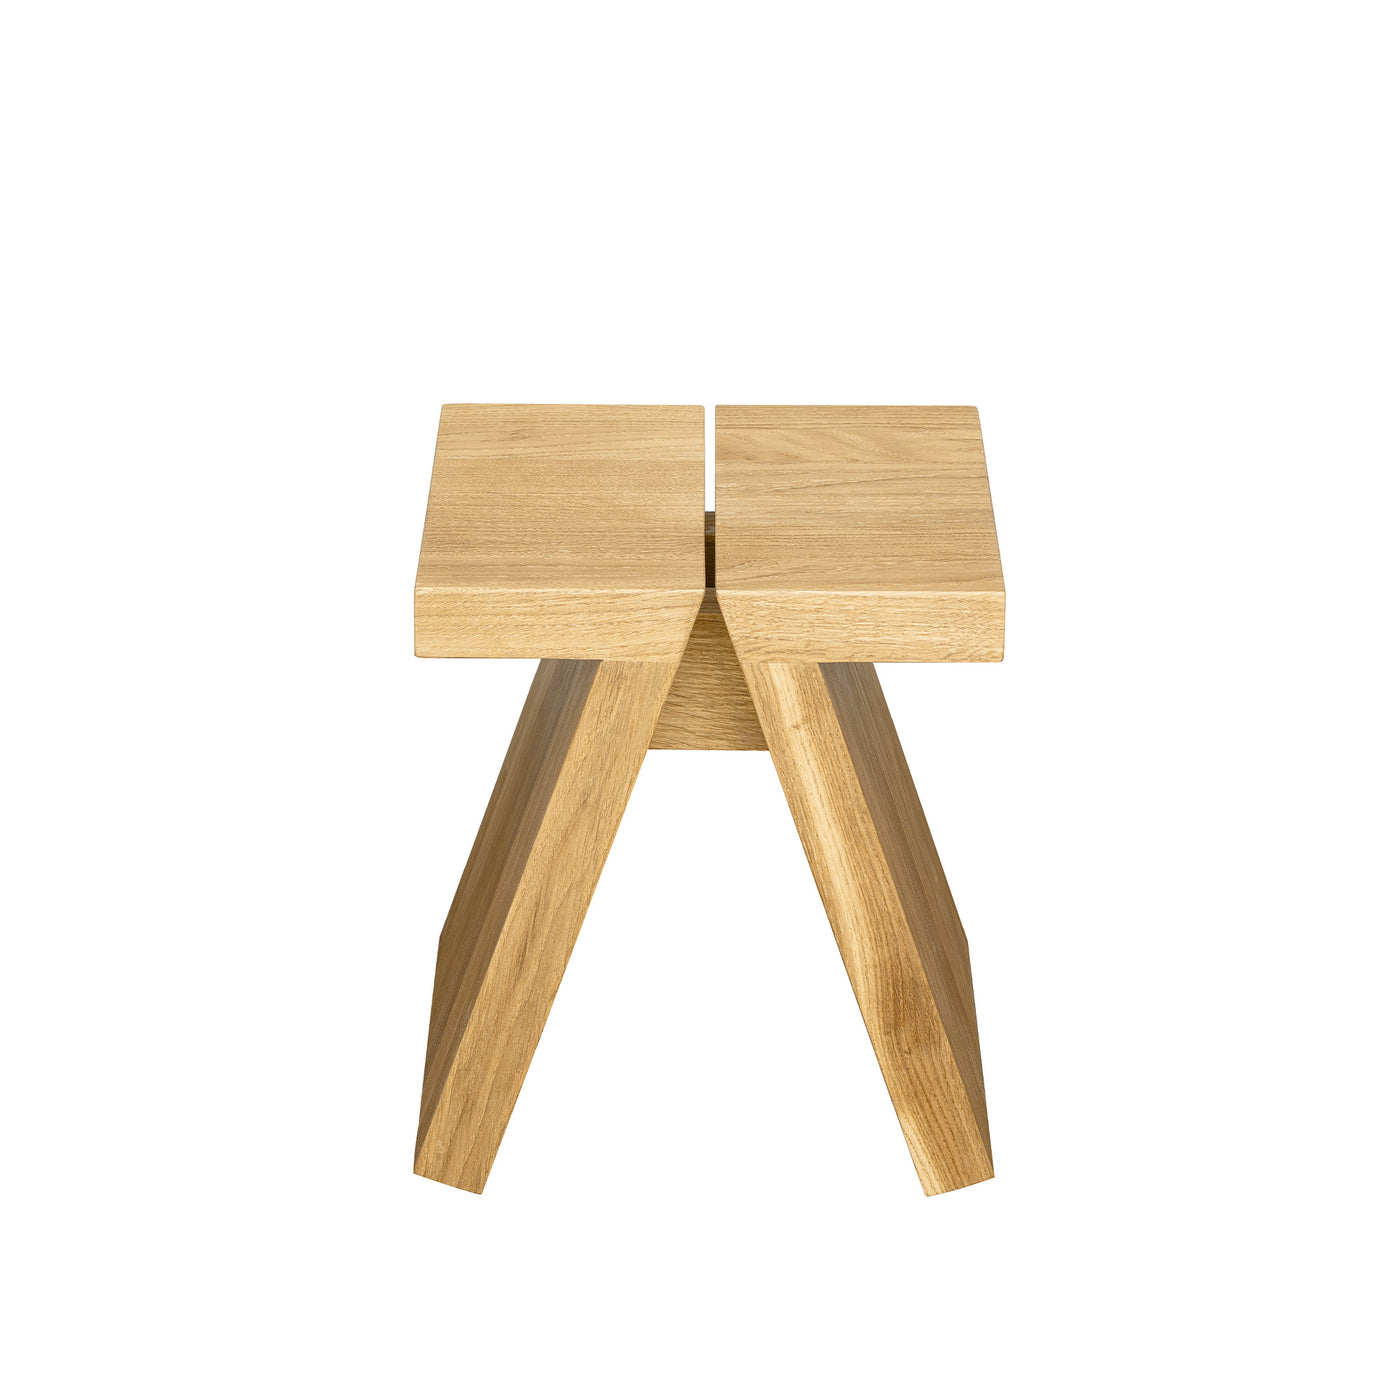 SUPERSOLID folding table